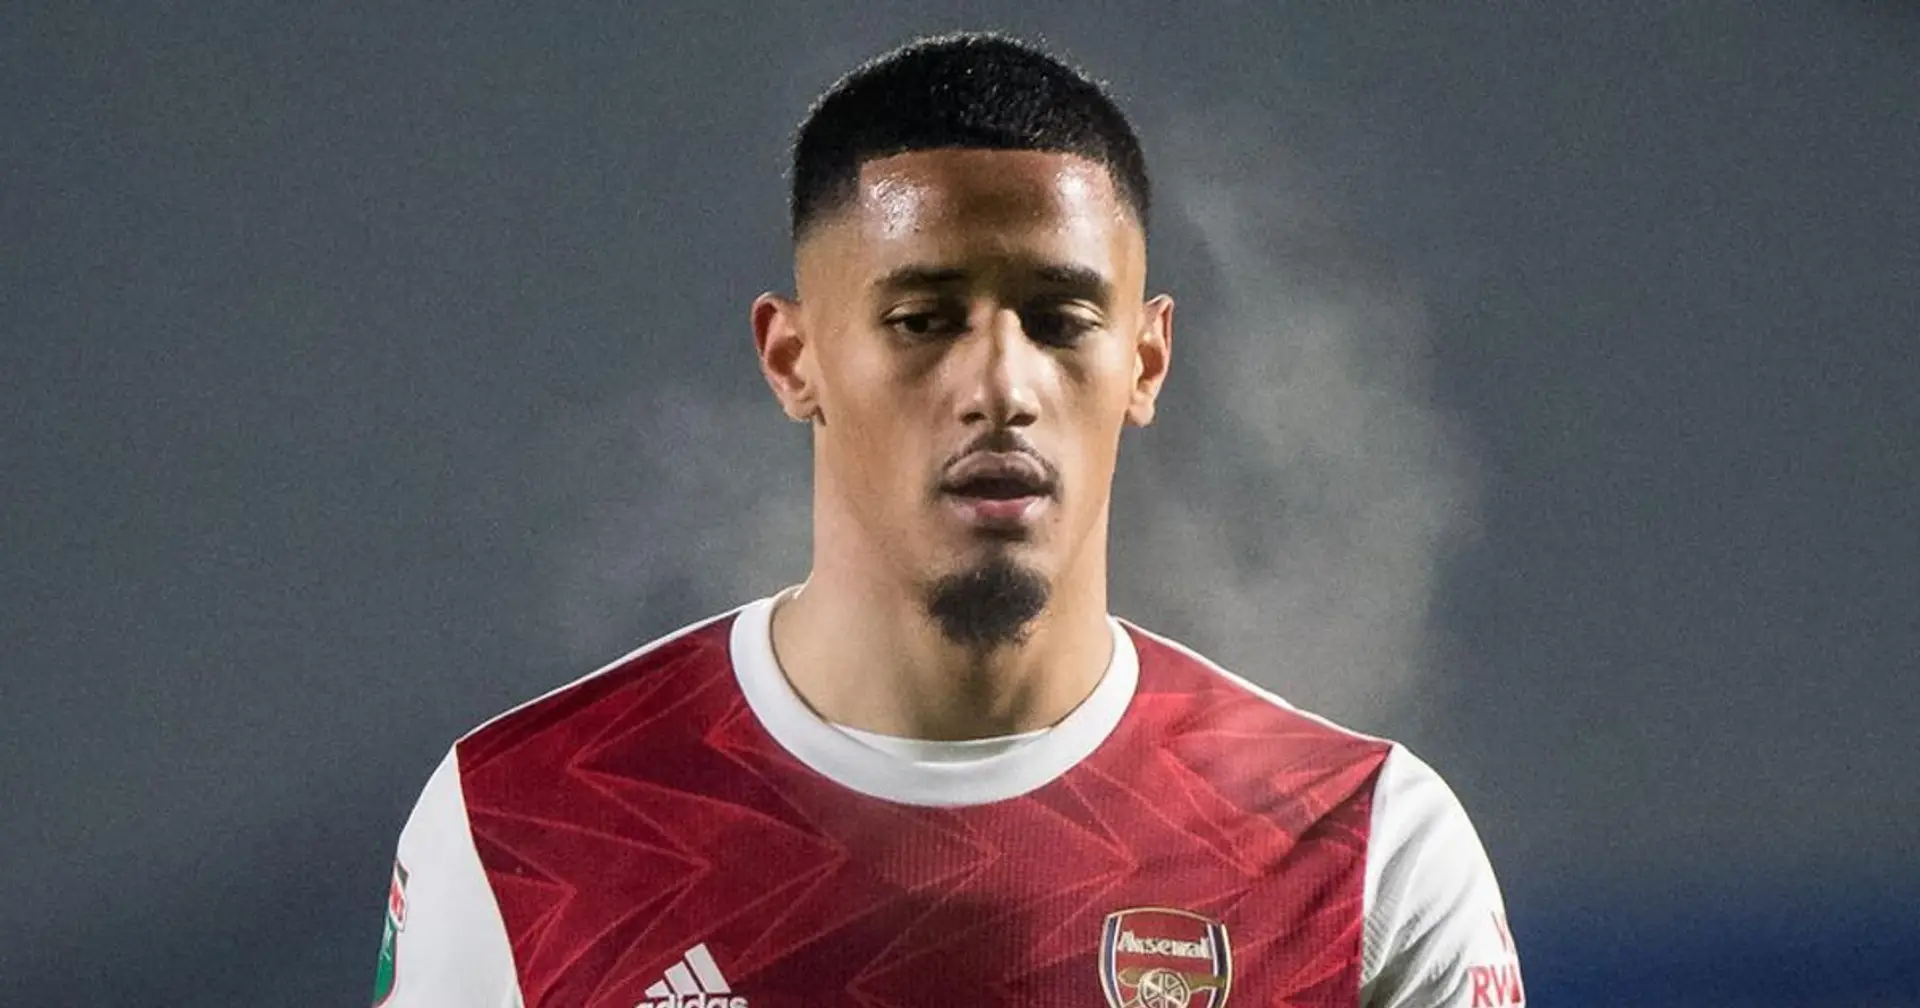 'It hurt me, it affected me': William Saliba opens up on lack of chances at Arsenal